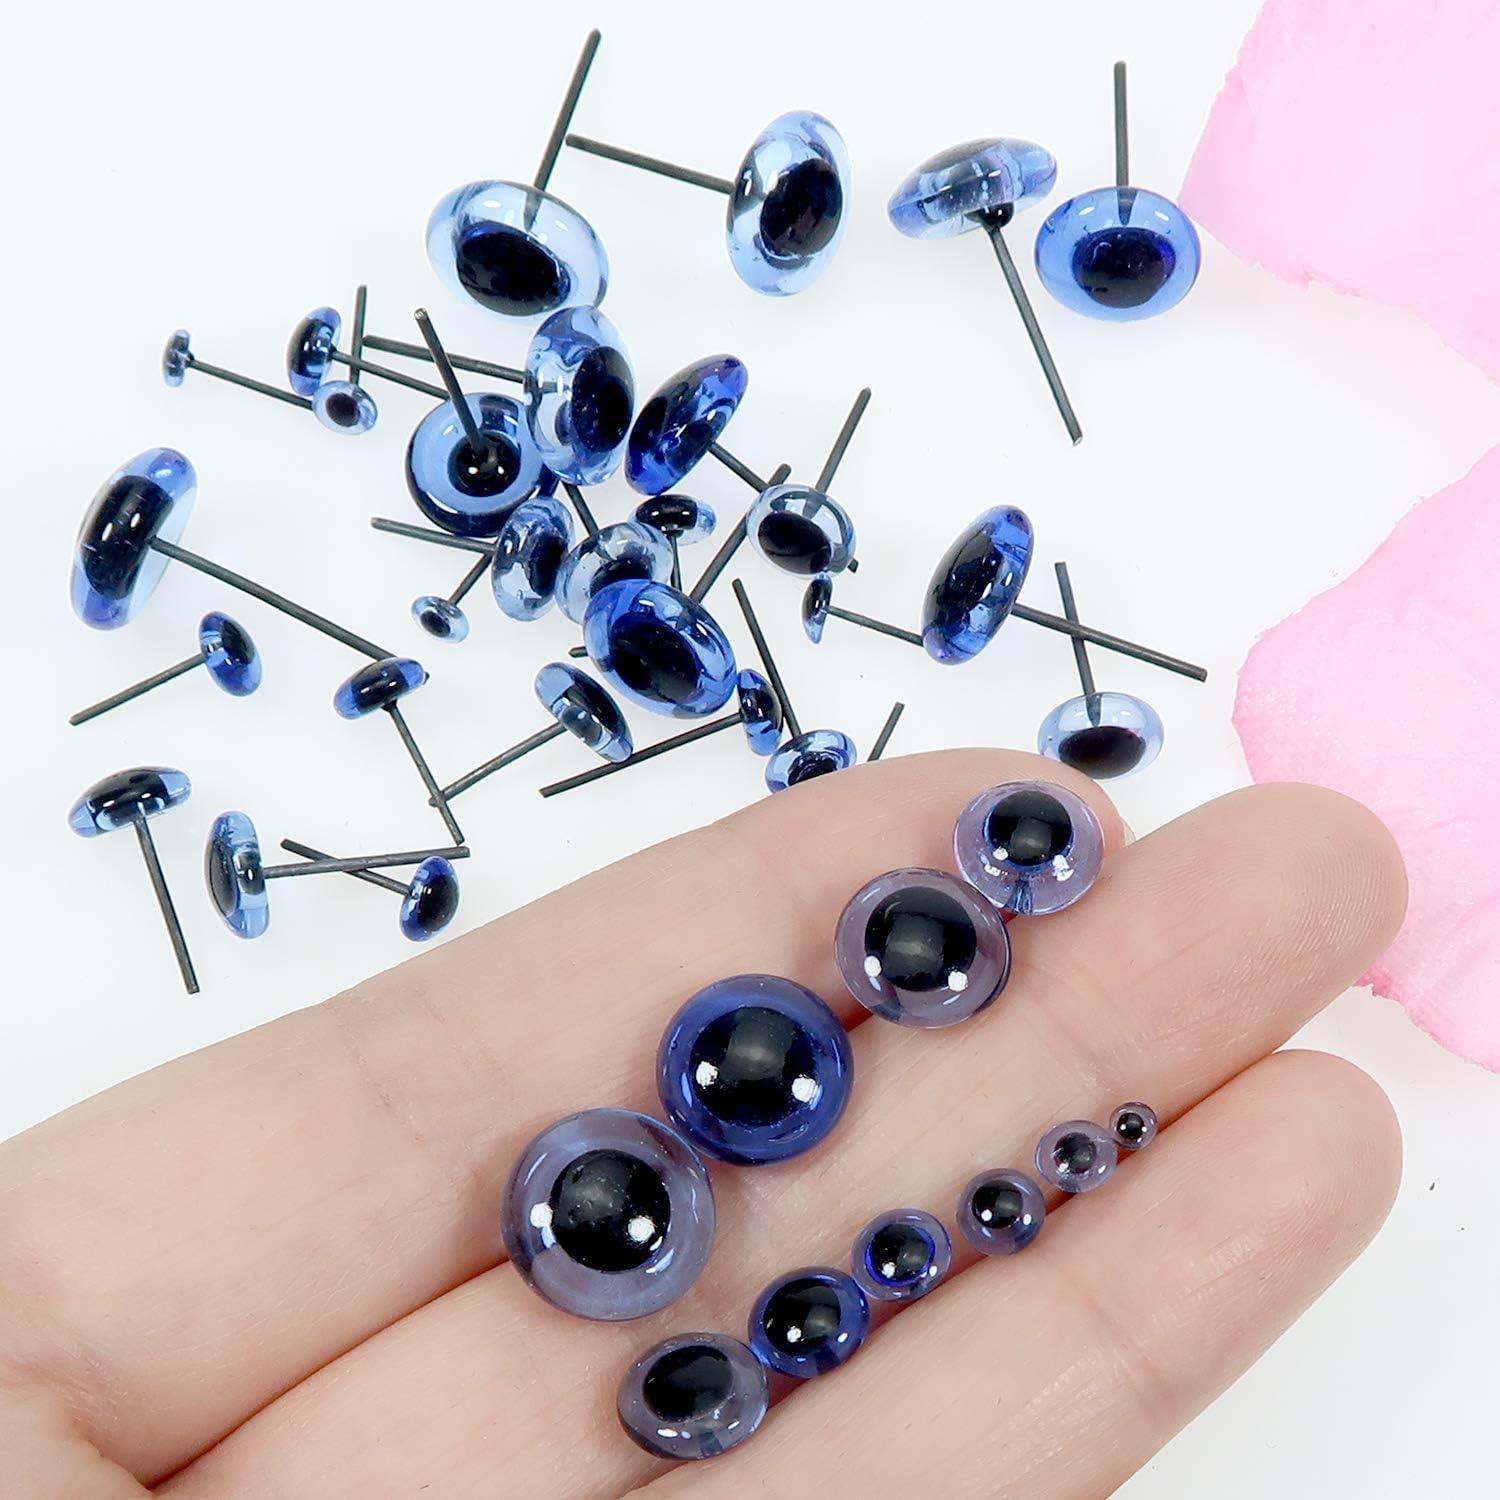 100pcs Brown Glass Eyes Kits Craft Eyes 3mm To 12mm For Doll Making Needle  Felting Crafts